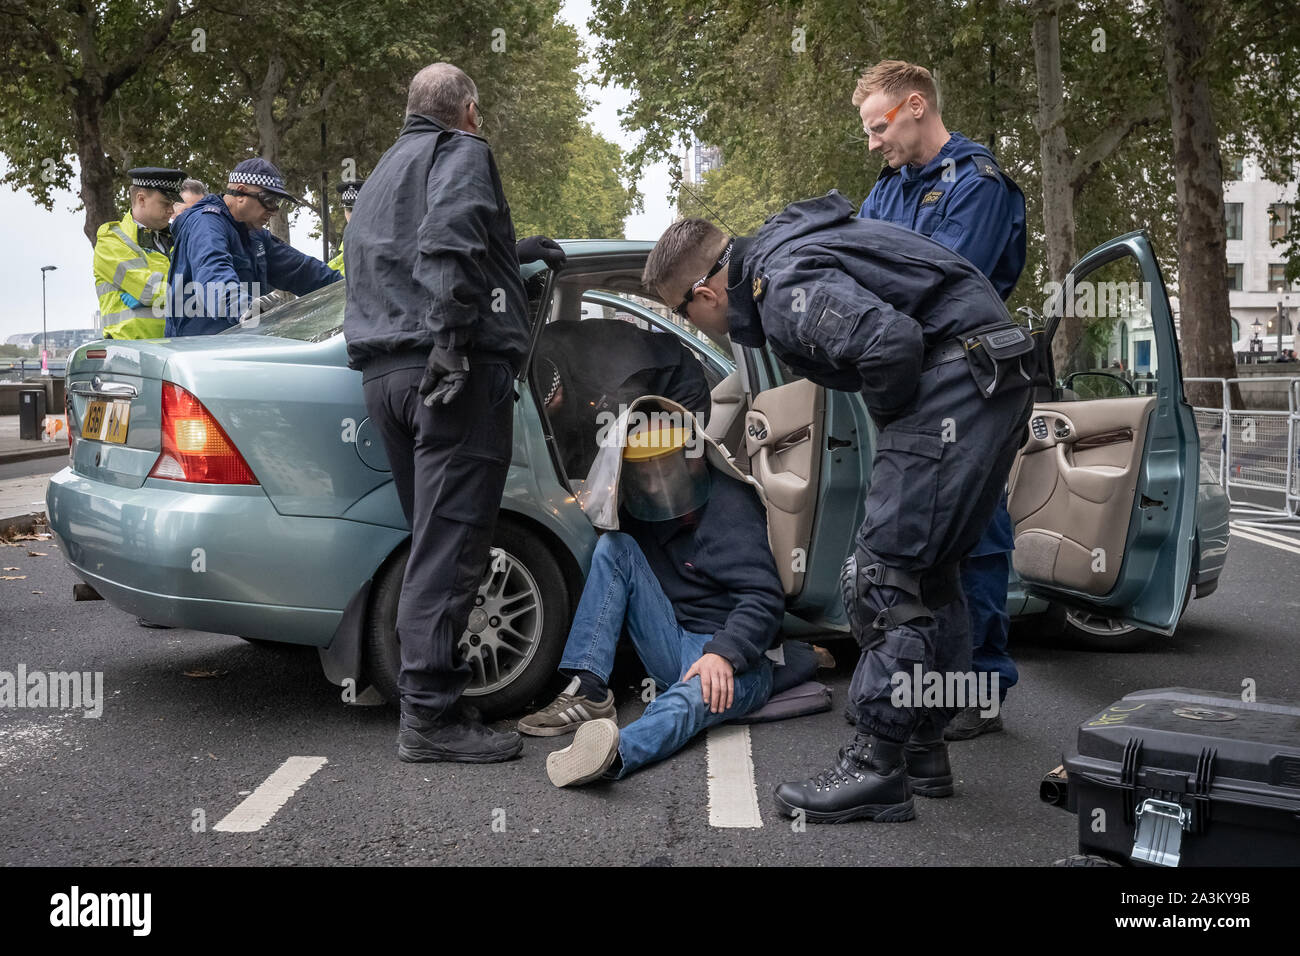 Specialist “protest removal team” police unit attempt to cut free a locked-on protester from inside a car parked to obstruct Victoria Embankment which the Extinction Rebellion protesters attempted to occupy from 6am. The environmental campaigners begin a new wave of protest action this morning causing disruption in London, UK. Stock Photo